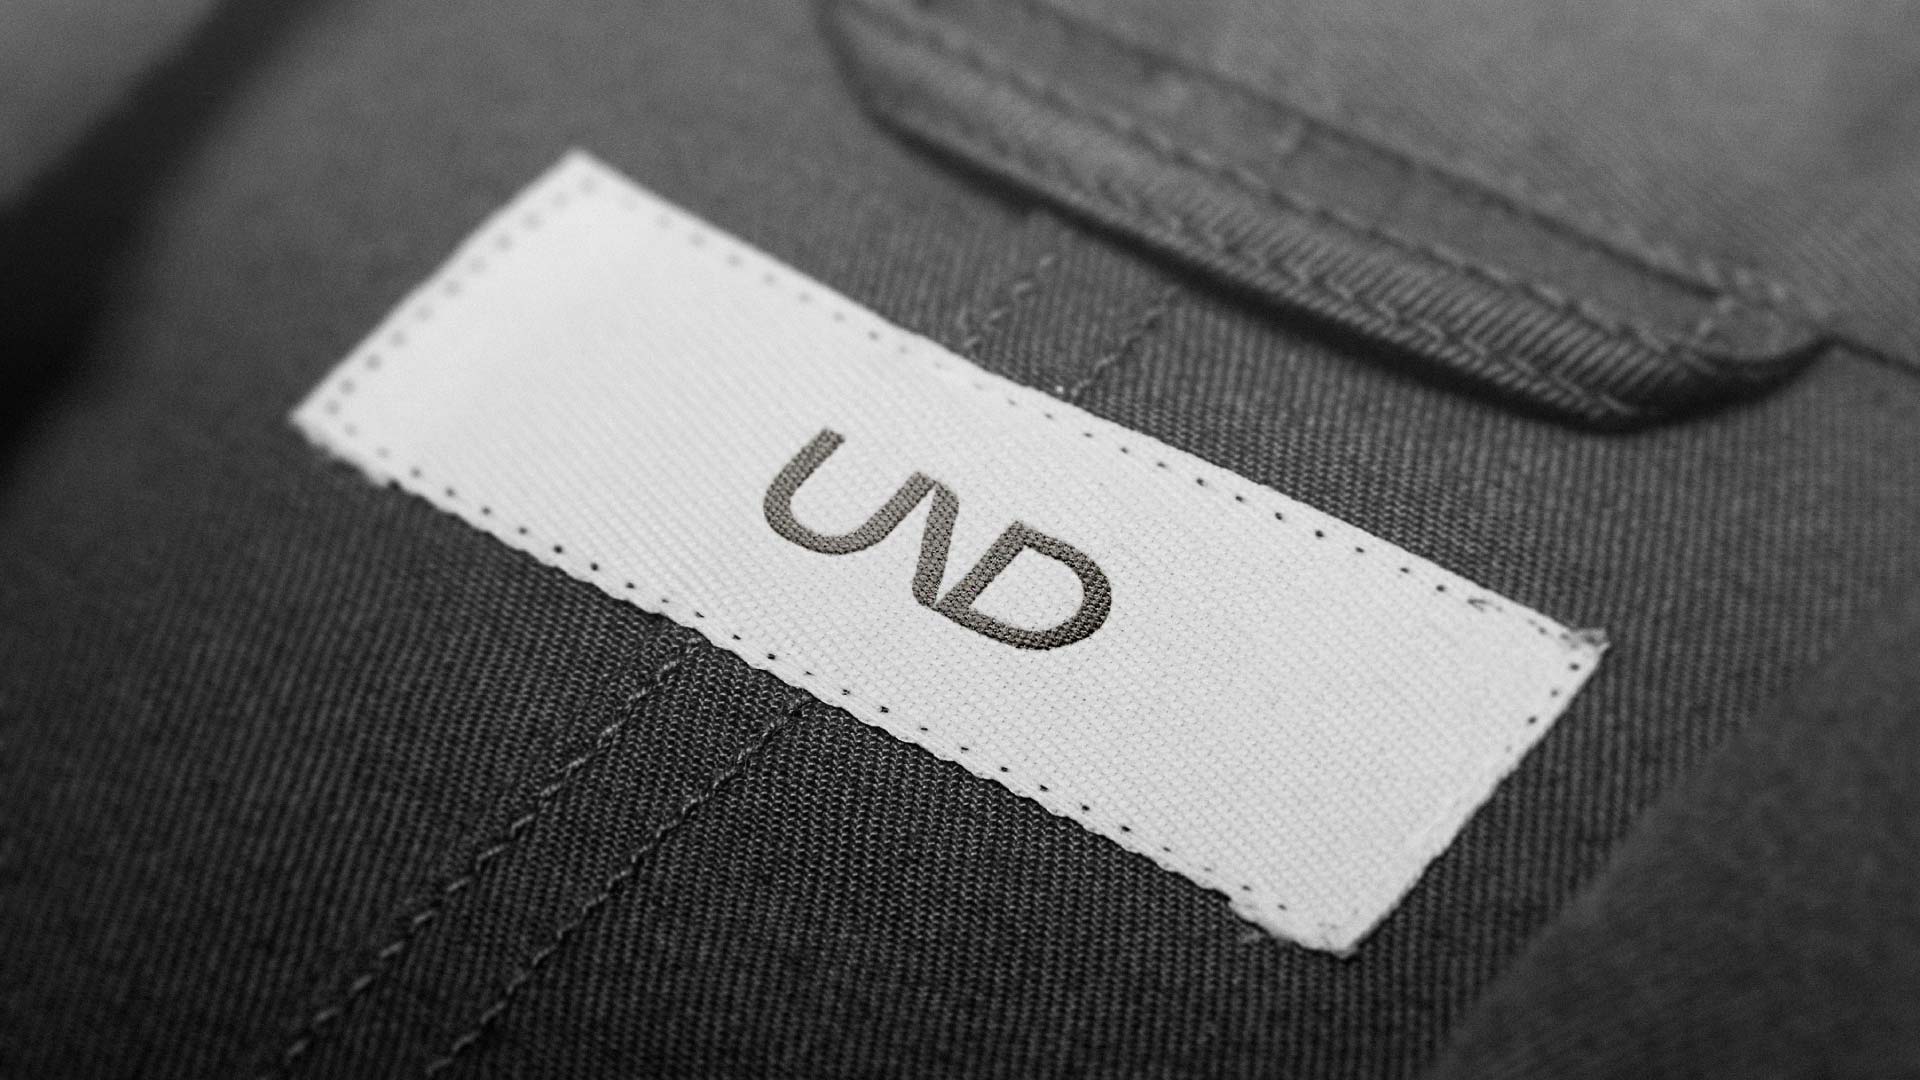 Branded clothing label for UND using the logo design.